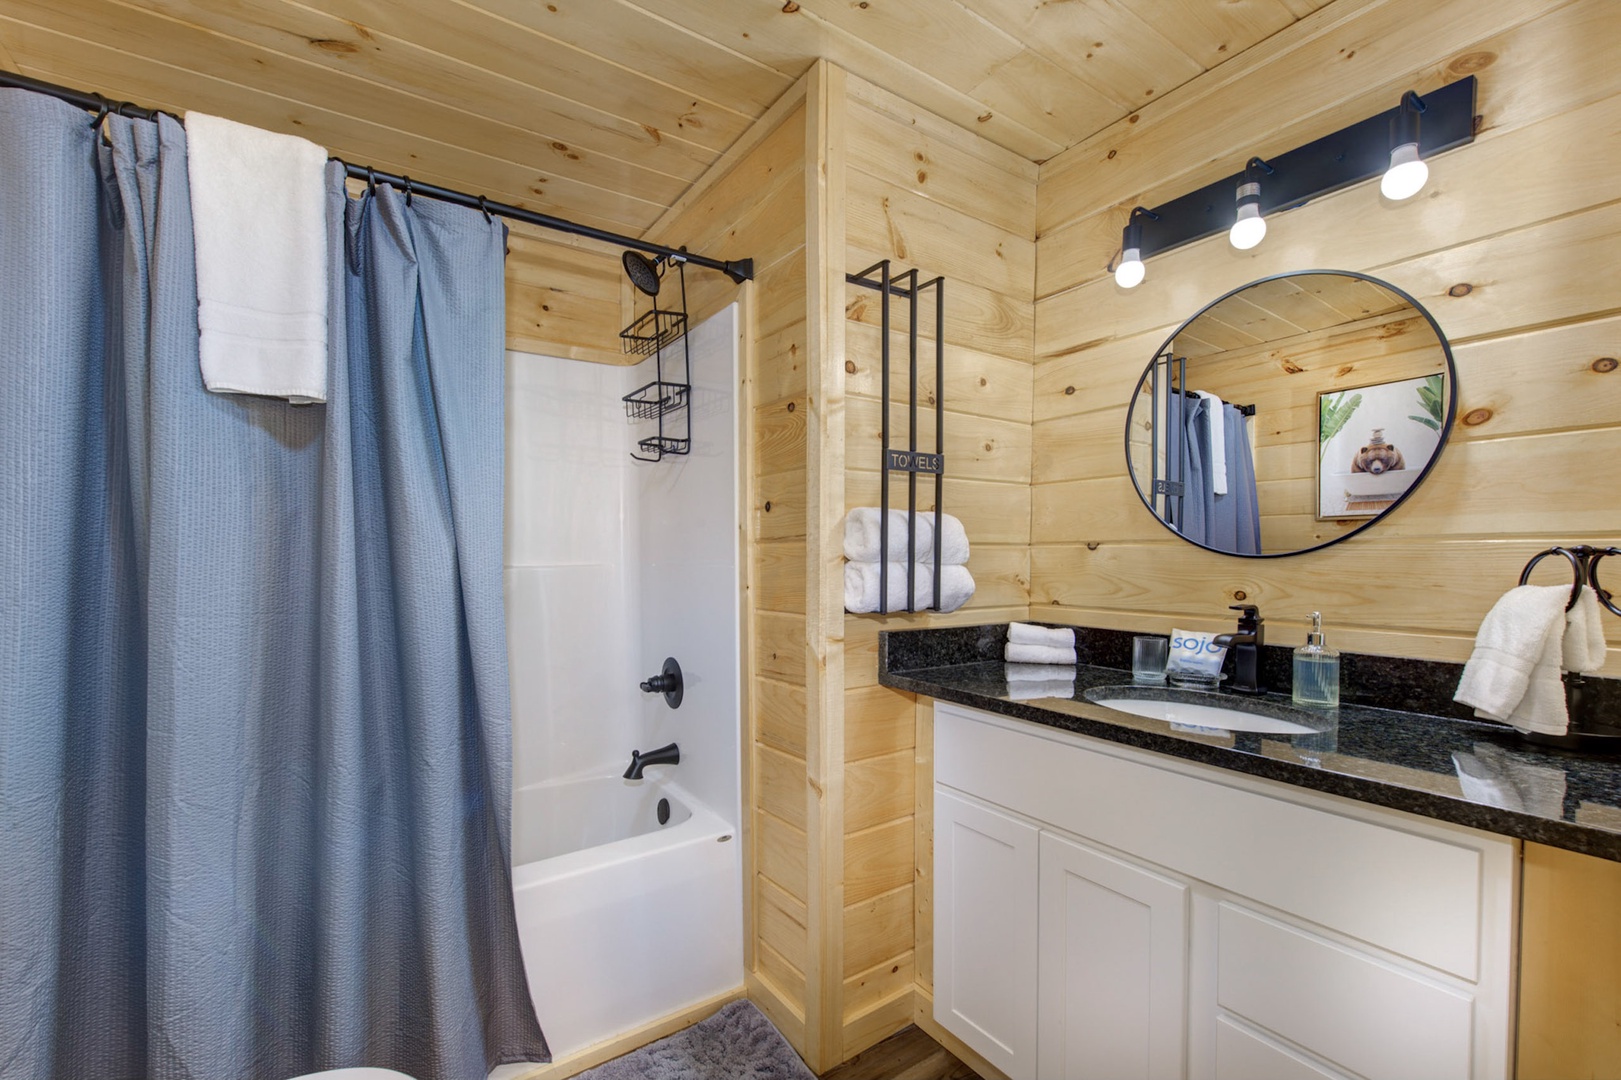 Relax in the comfort of this cozy full bathroom